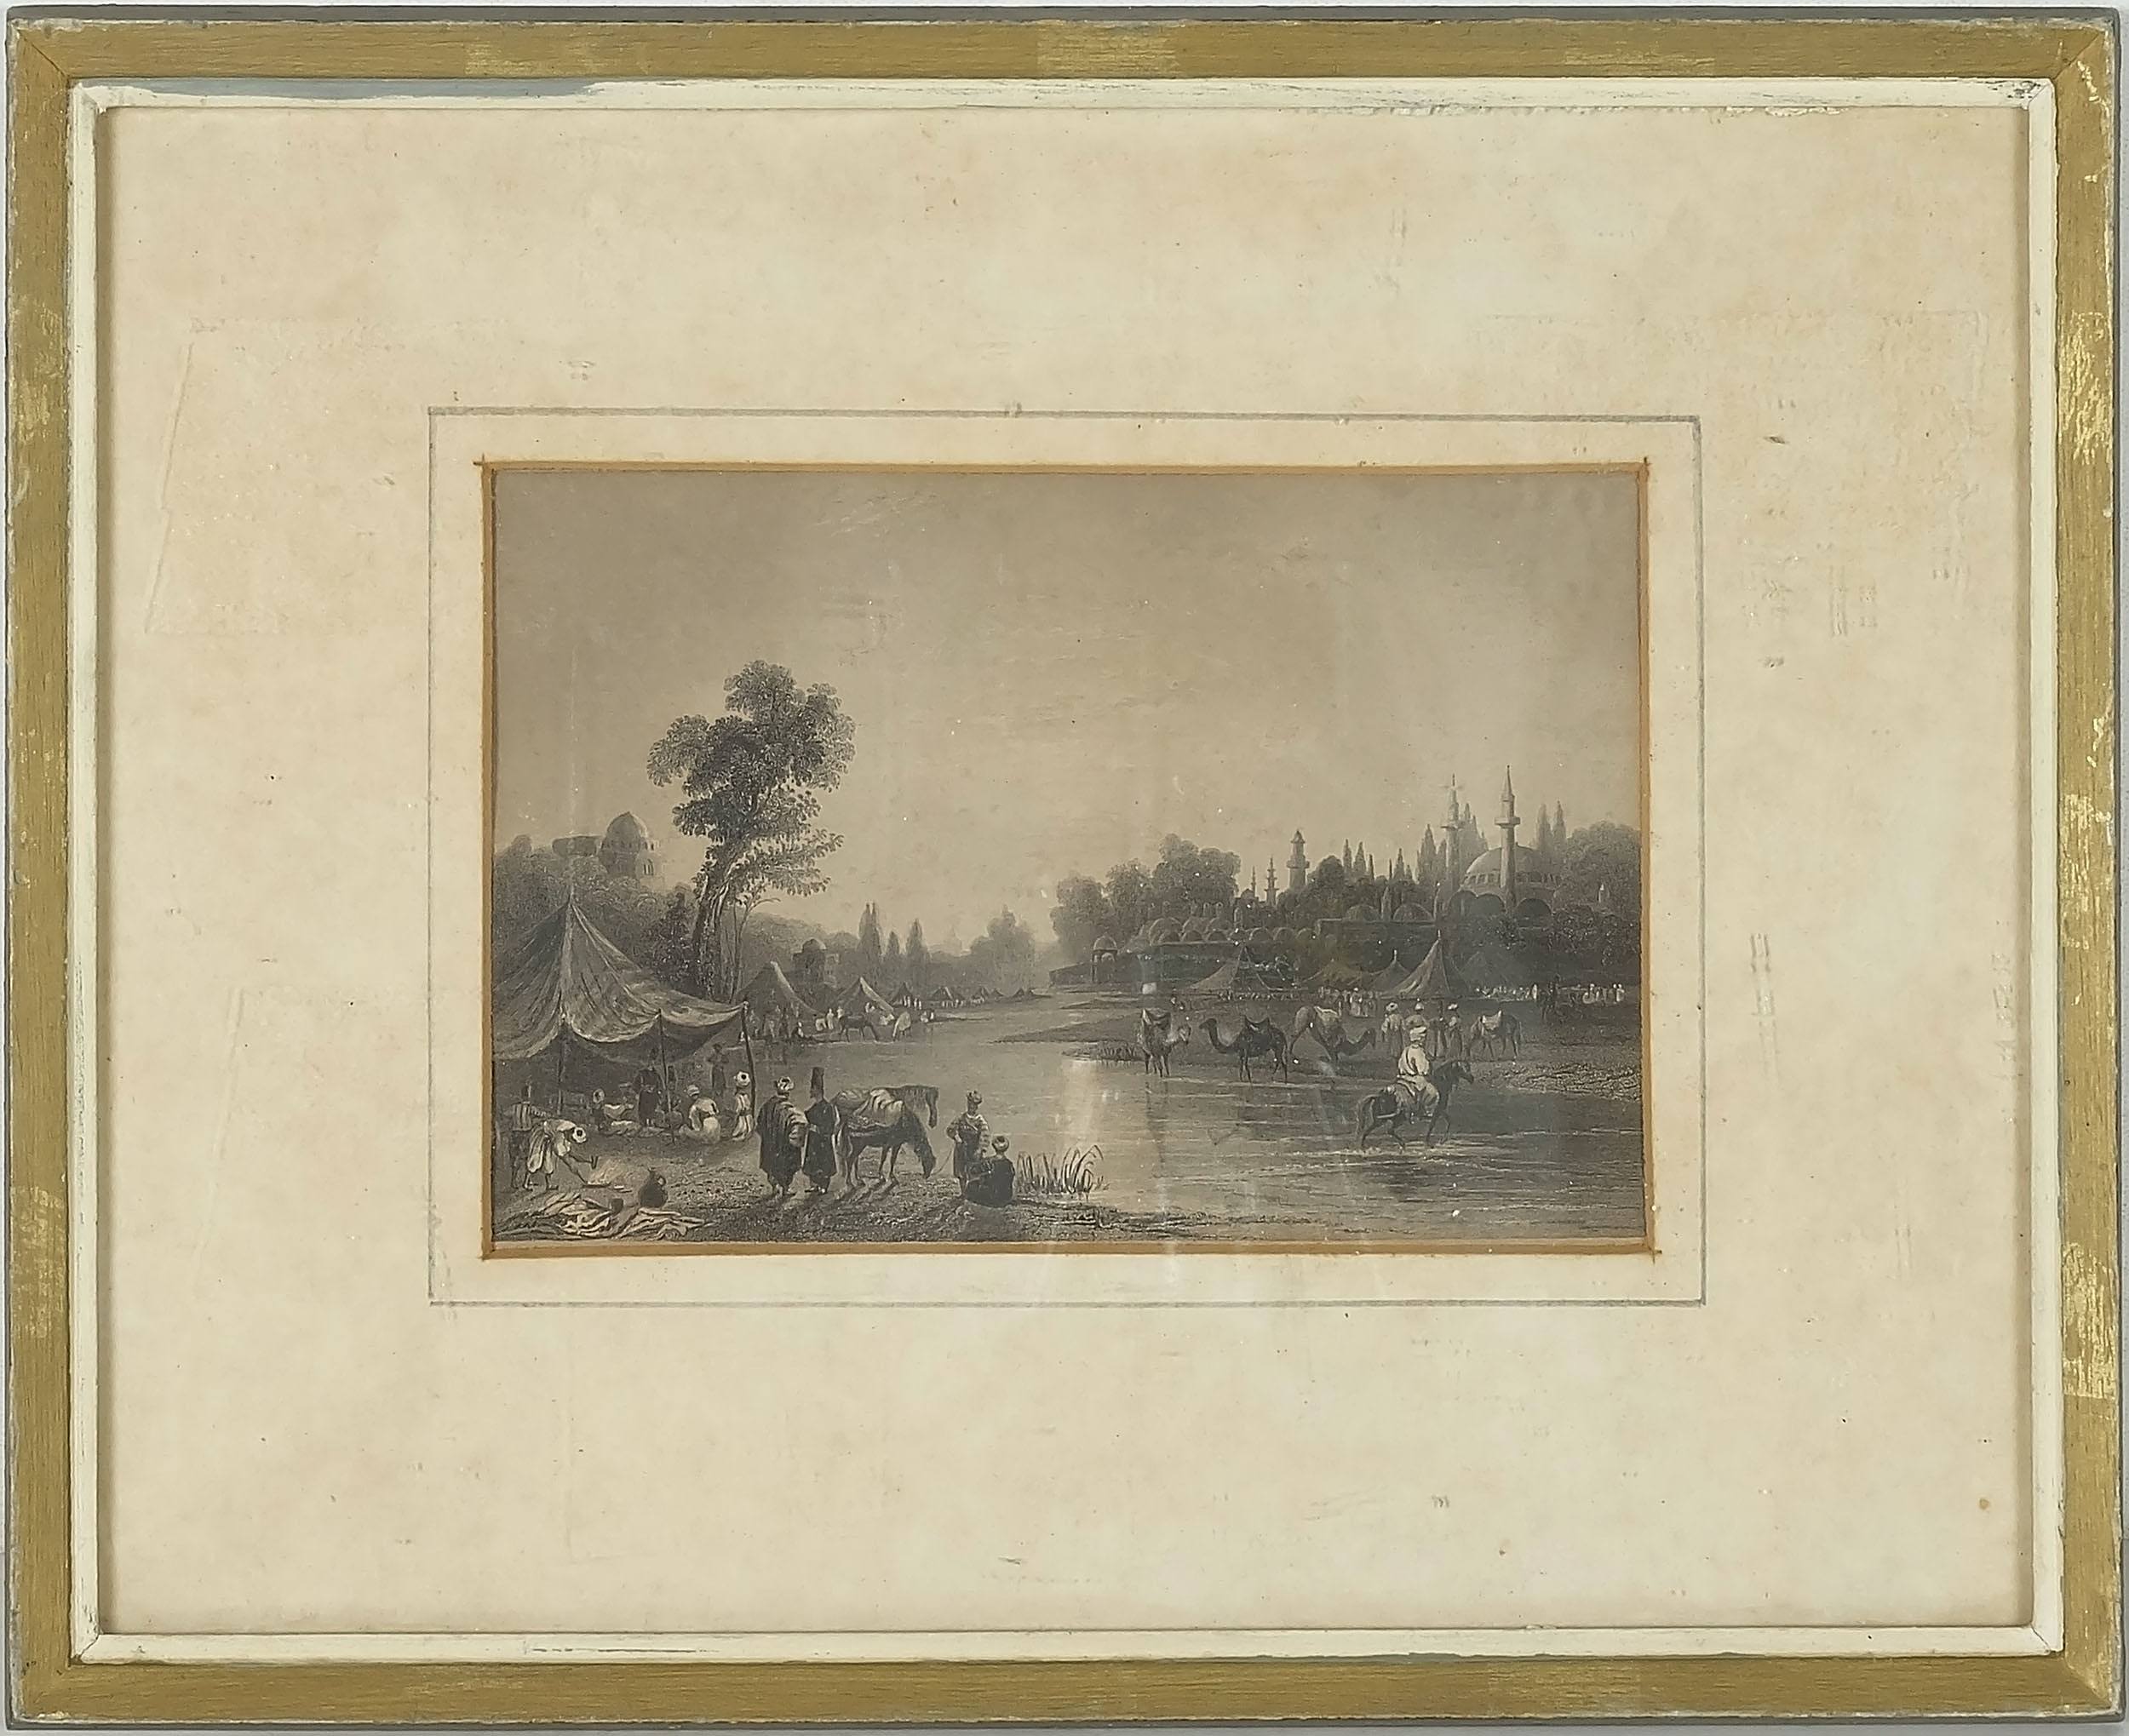 'William Henry Bartlett (1809-1854) 19th Century Lithograph of The River Barrada The Ancient Pharpar, Damascus'